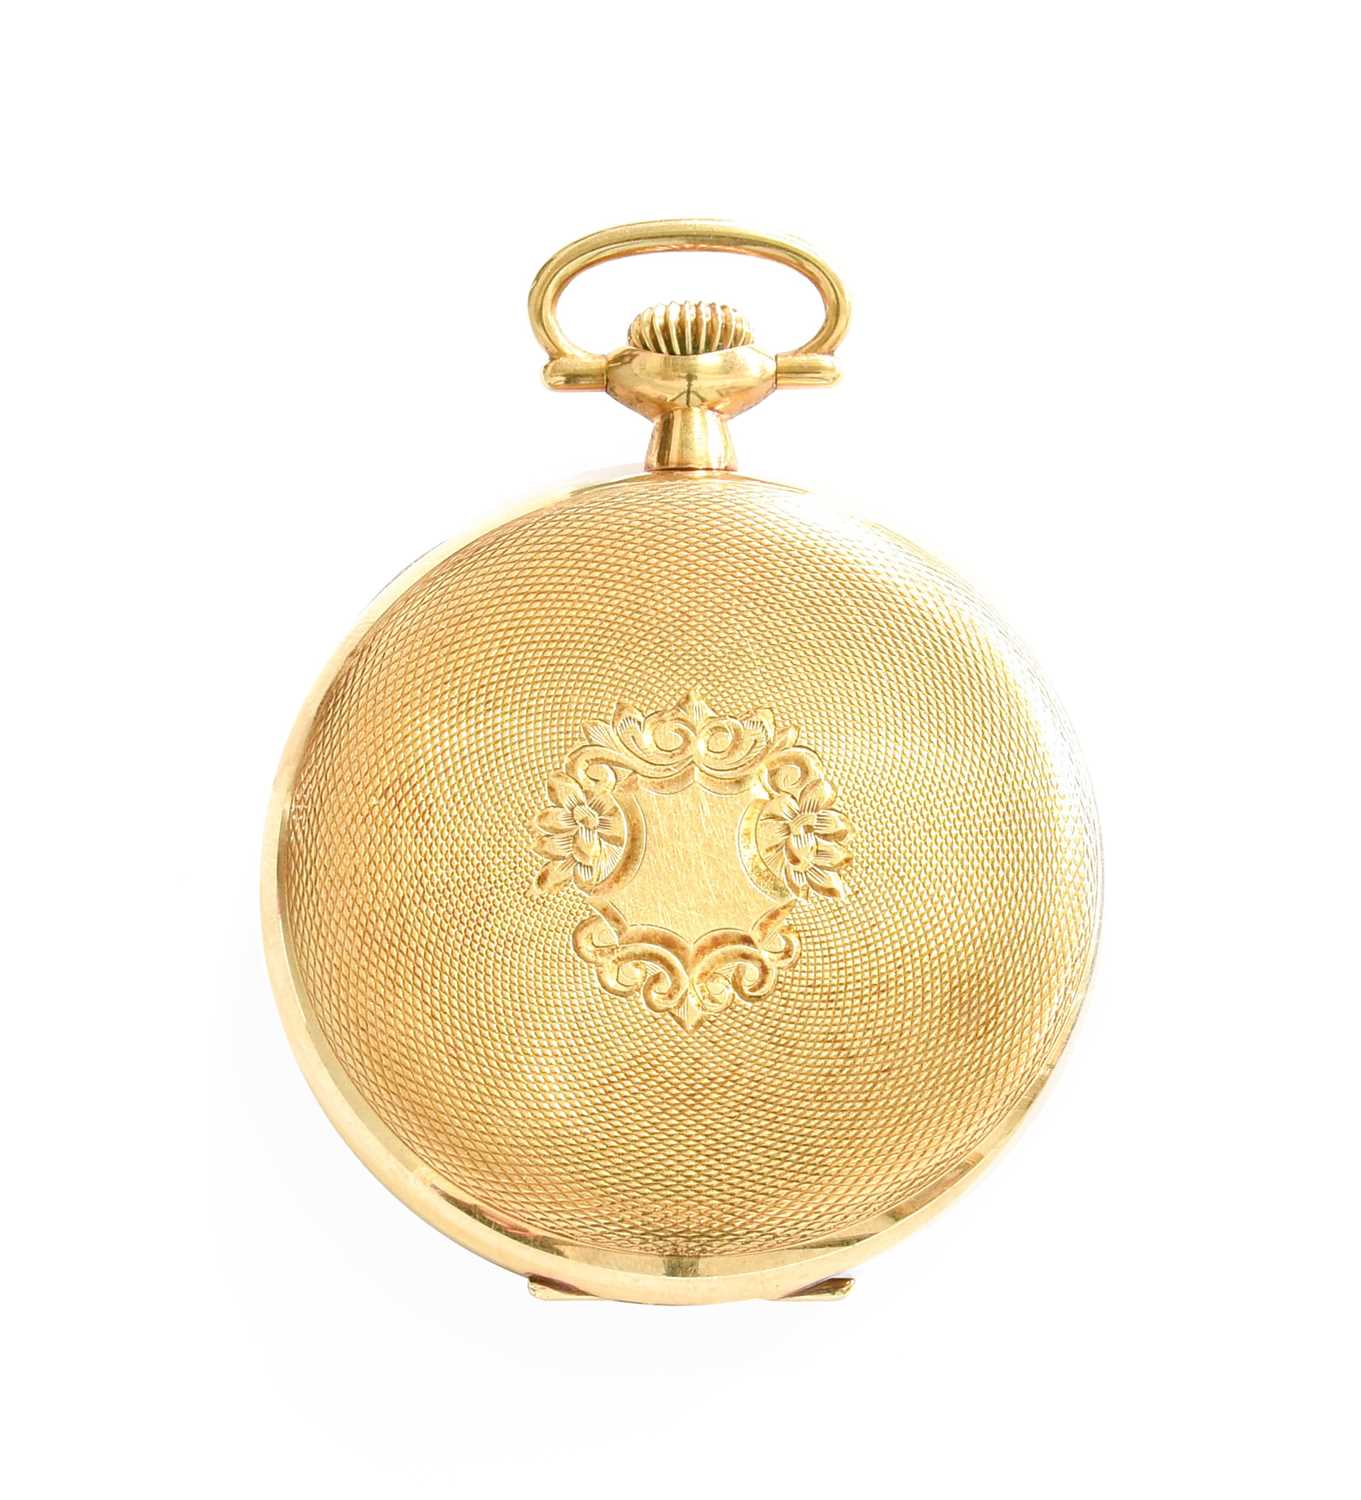 A 14 Carat Gold Open Faced Pocket Watch, signed Illinois No dust cover  Outer case diameter - 44mm - Image 2 of 3